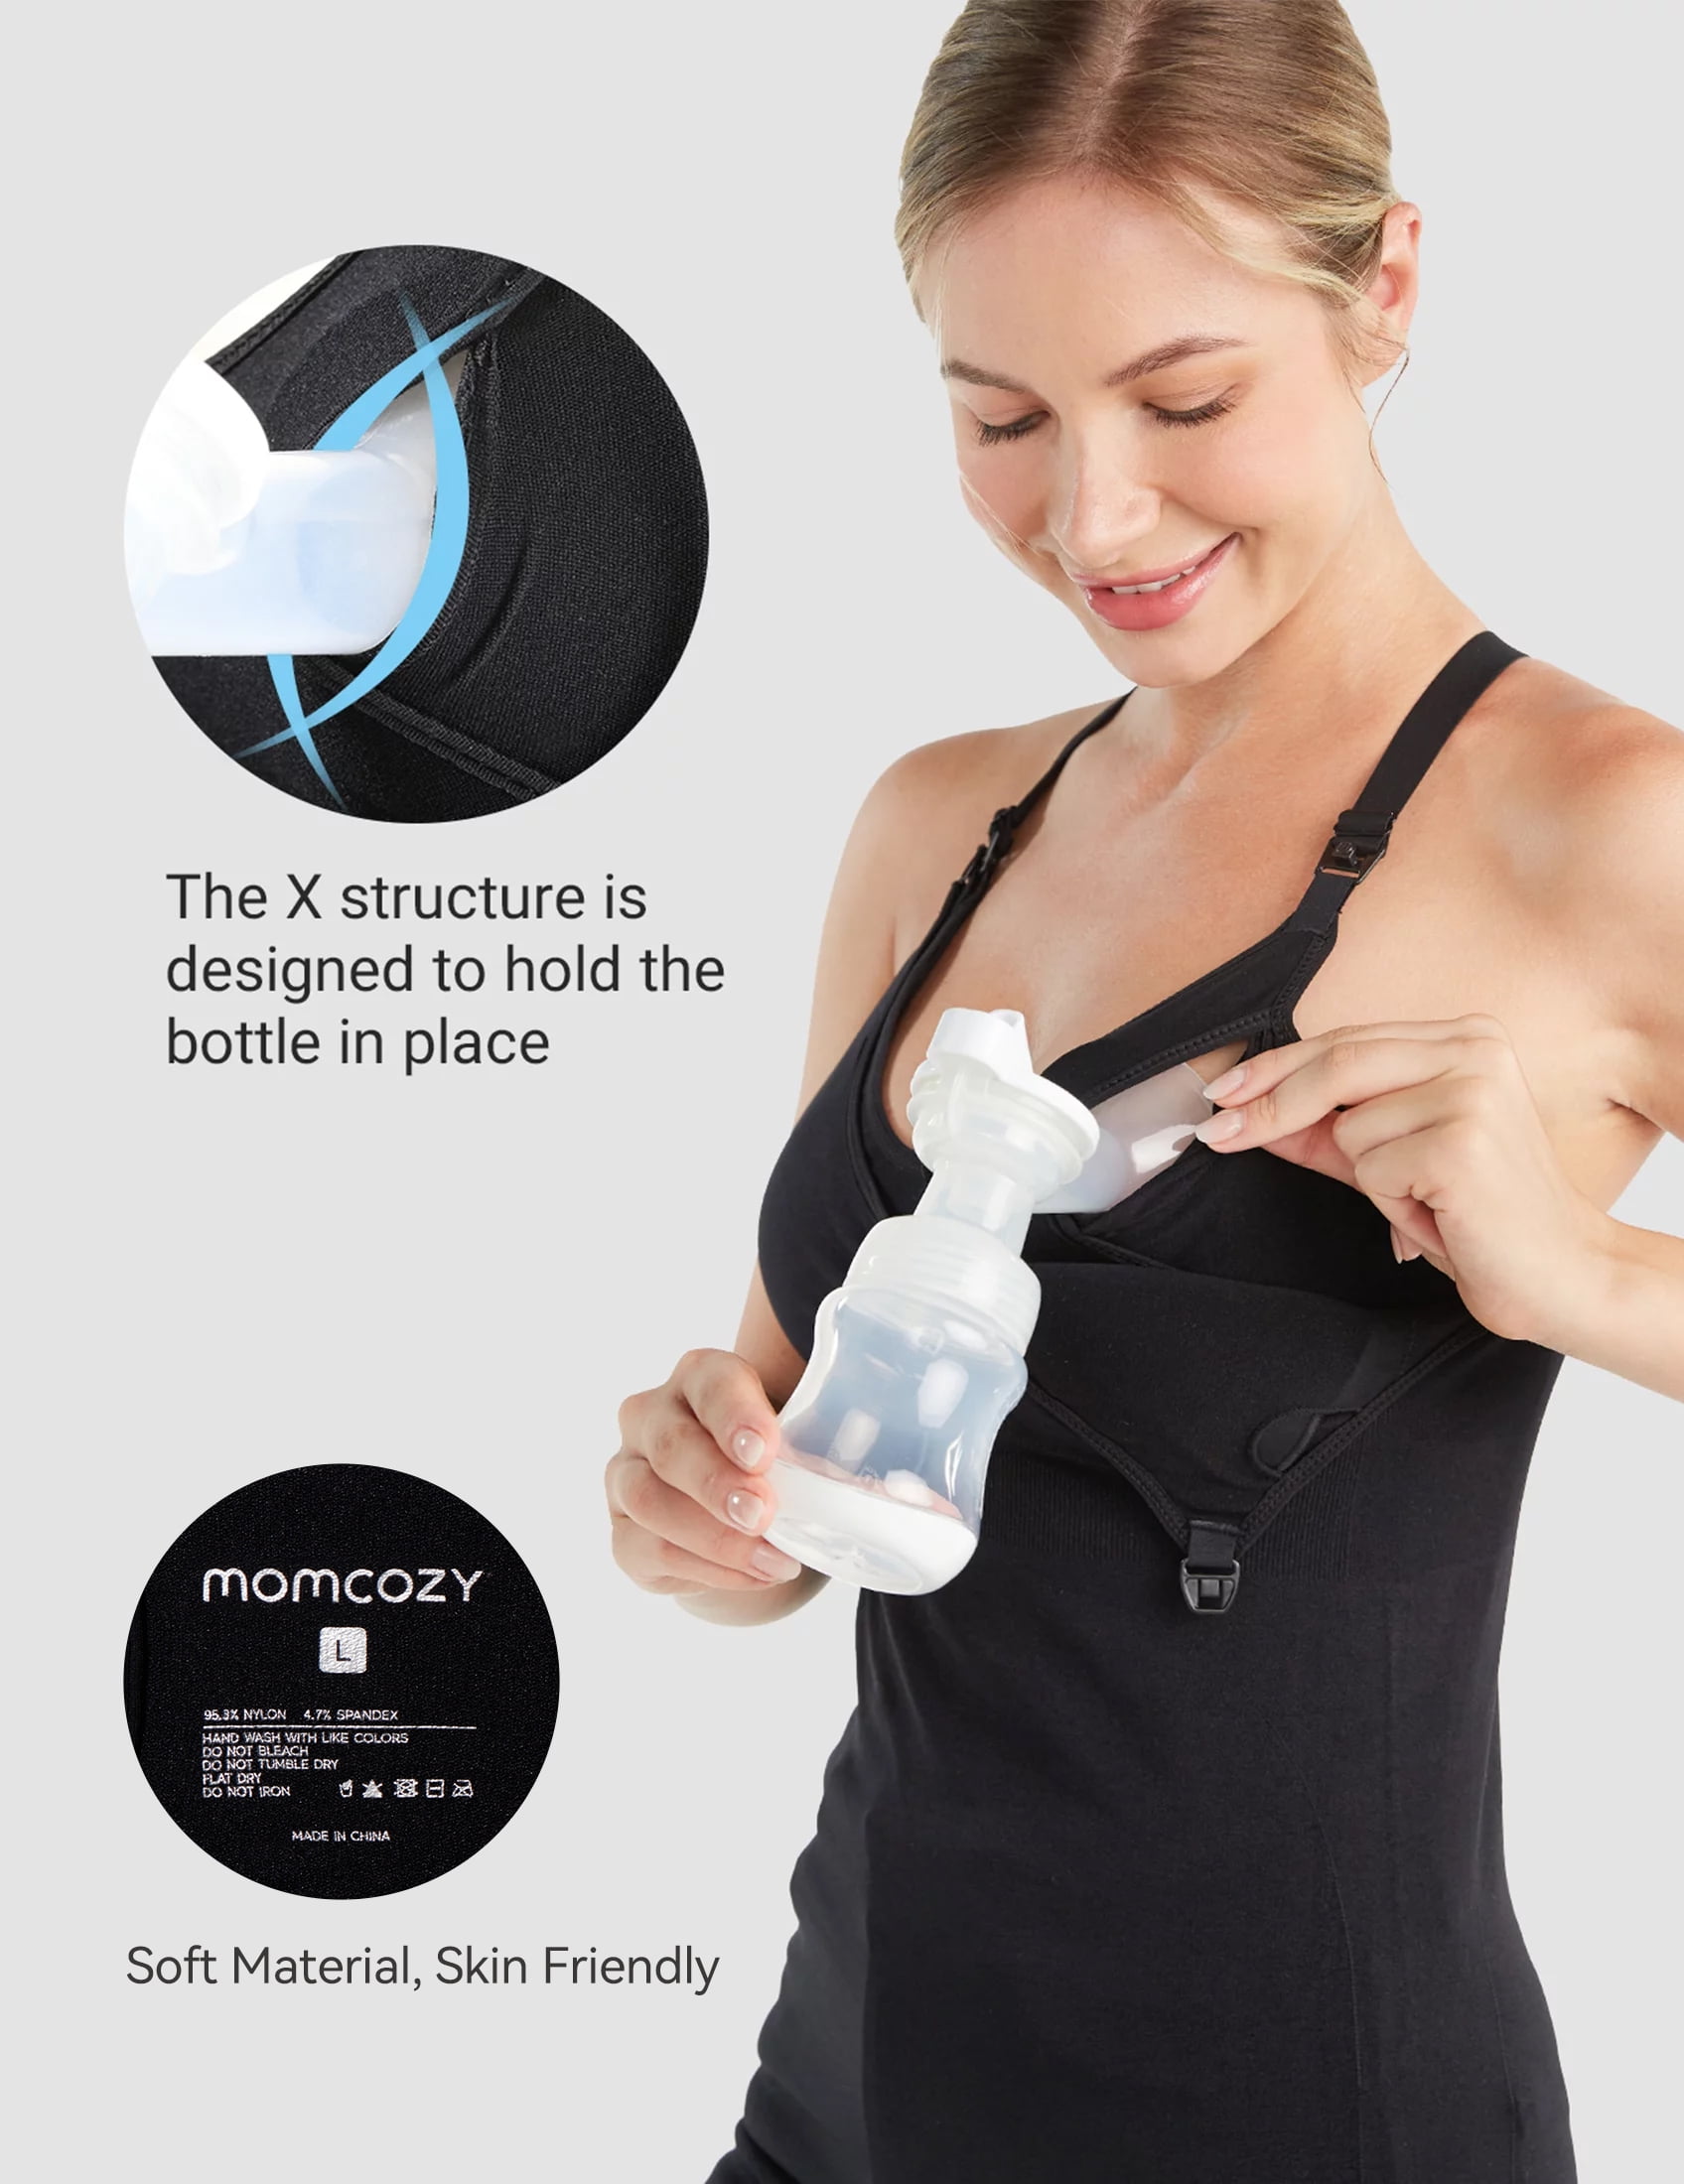 Hands Free Pumping Bra, Momcozy Adjustable Breast-Pumps Holding and Nursing  Bra, Suitable for Breastfeeding-Pumps by Lansinoh, Philips Avent, Spectra,  Evenflo and More(Black, X-Small) 